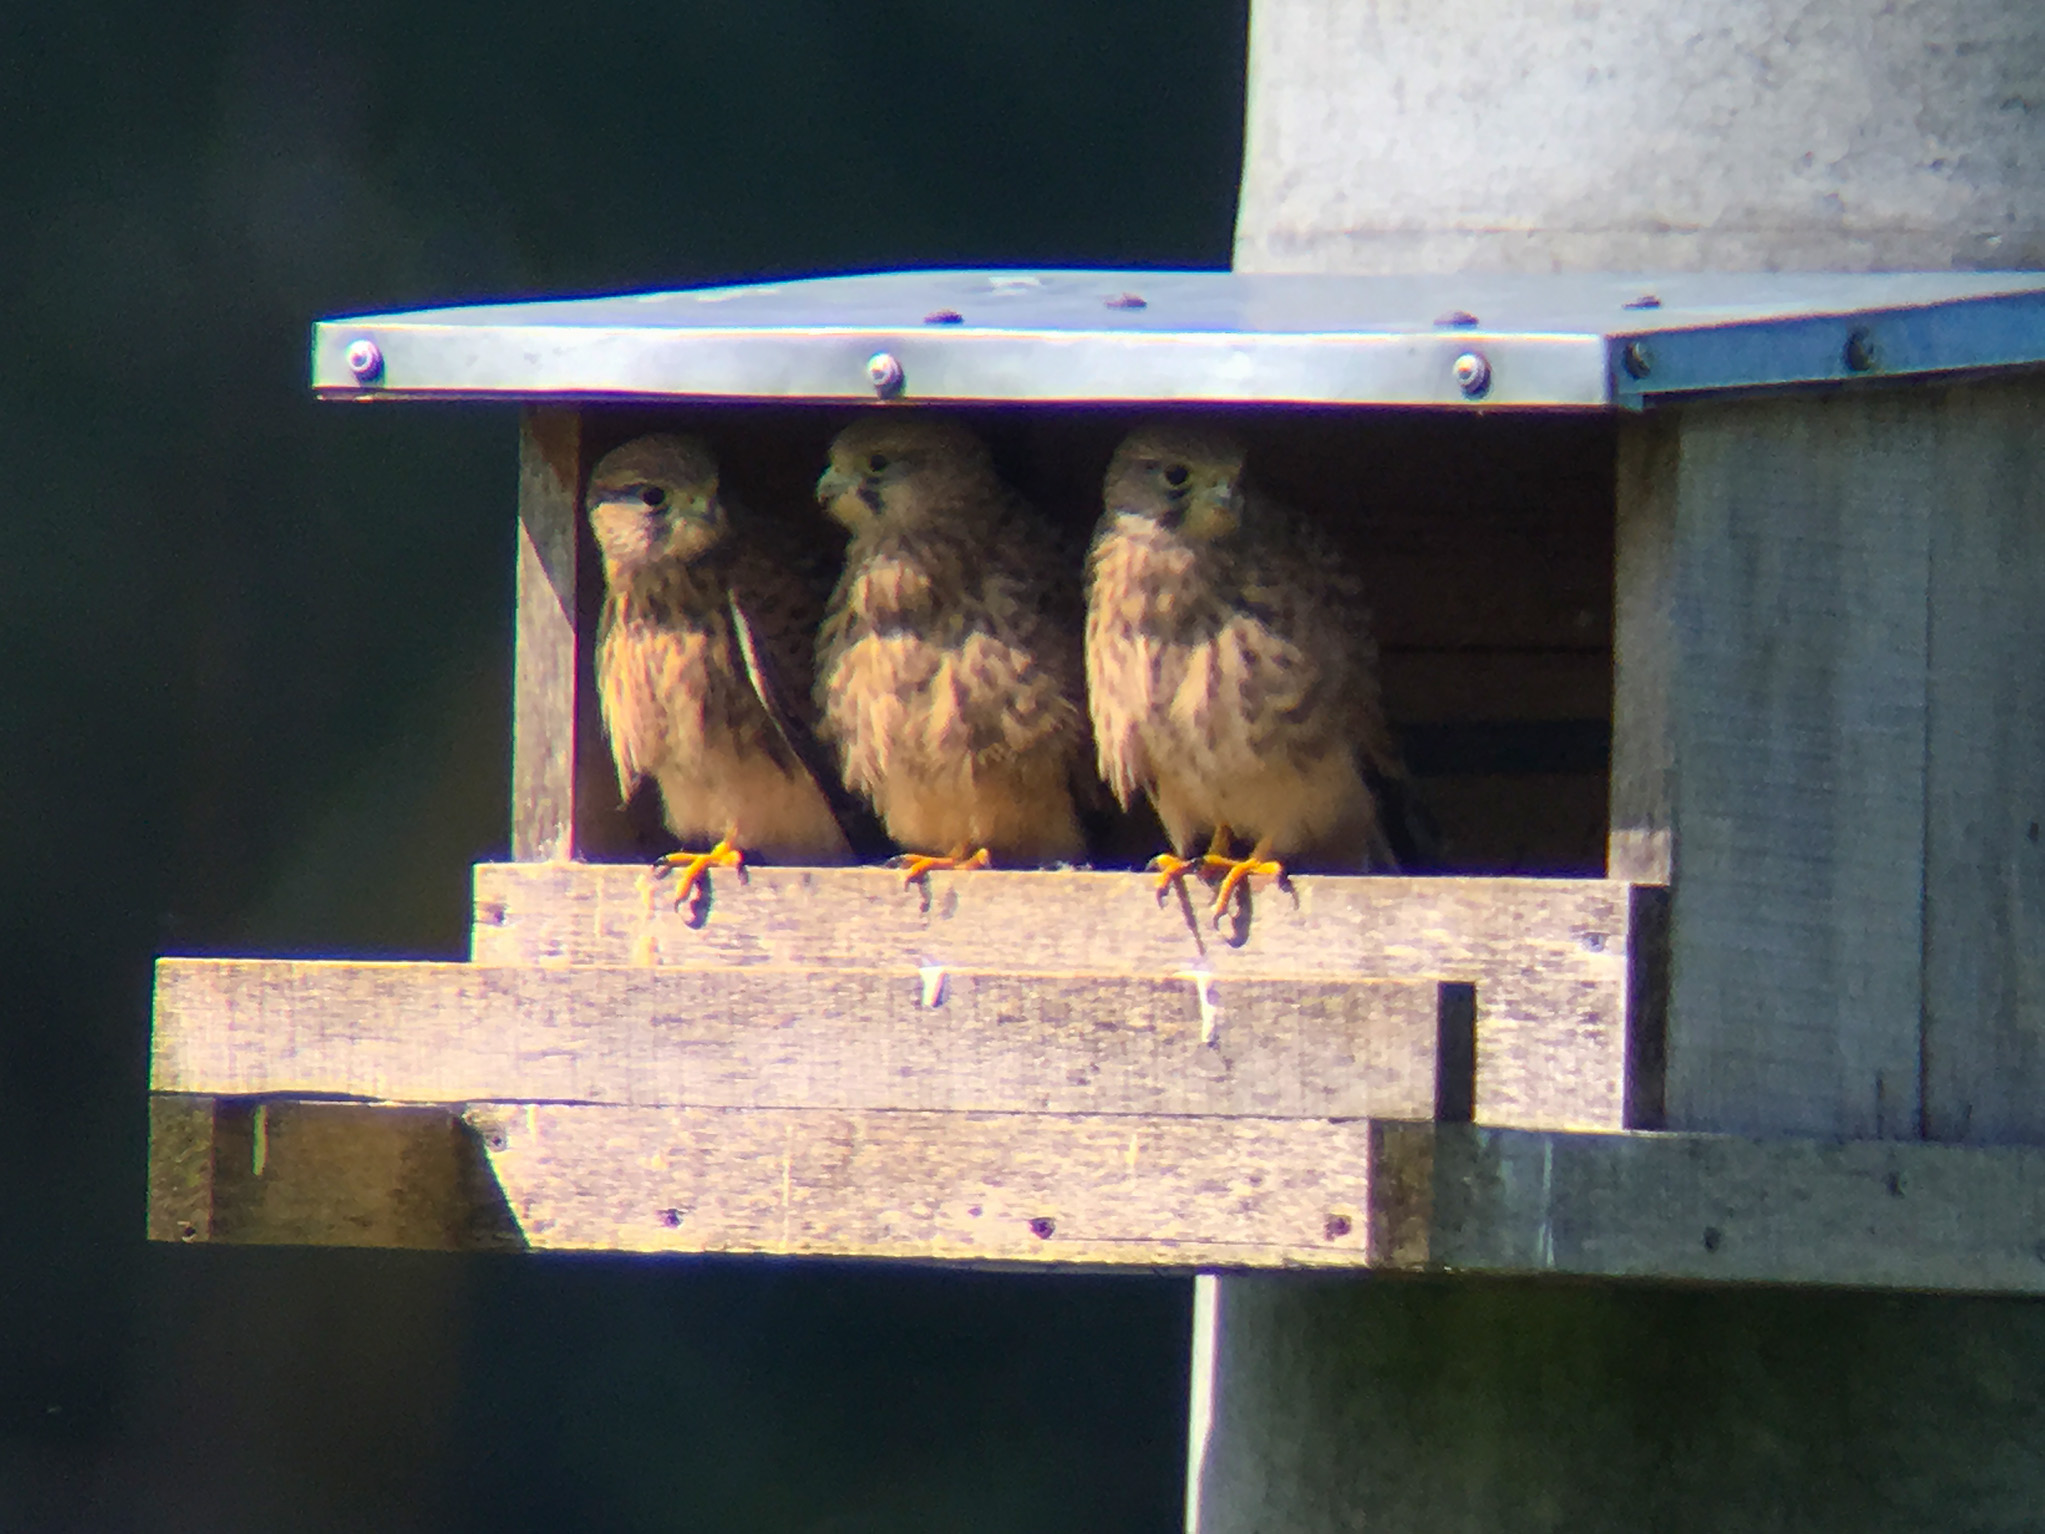 Overview of the Common Kestrels breeding season and occupation of nests in 2017